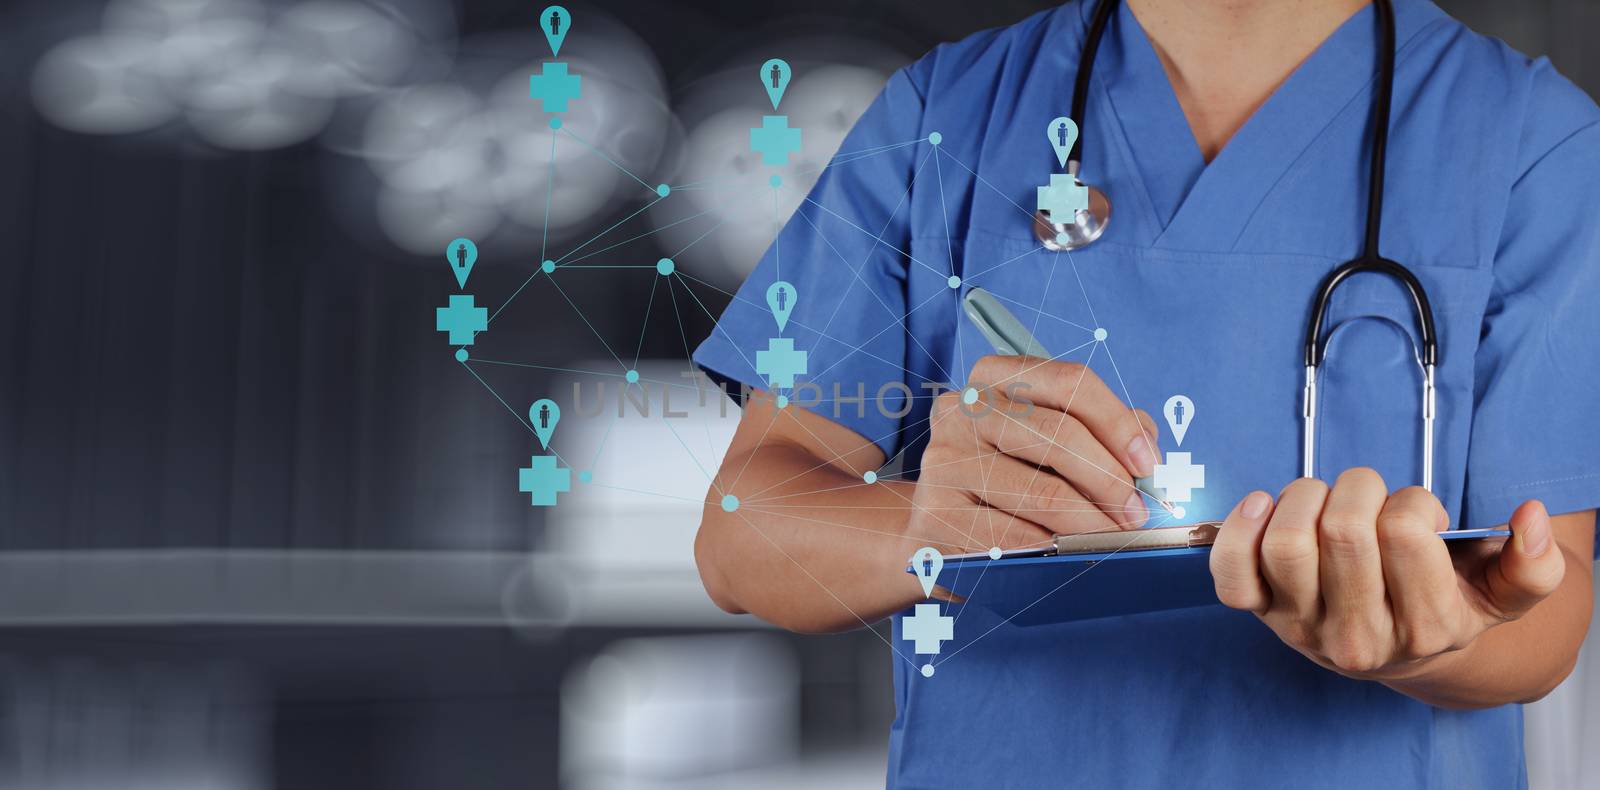 Medical Doctor working  with note board as medical network conce by everythingpossible